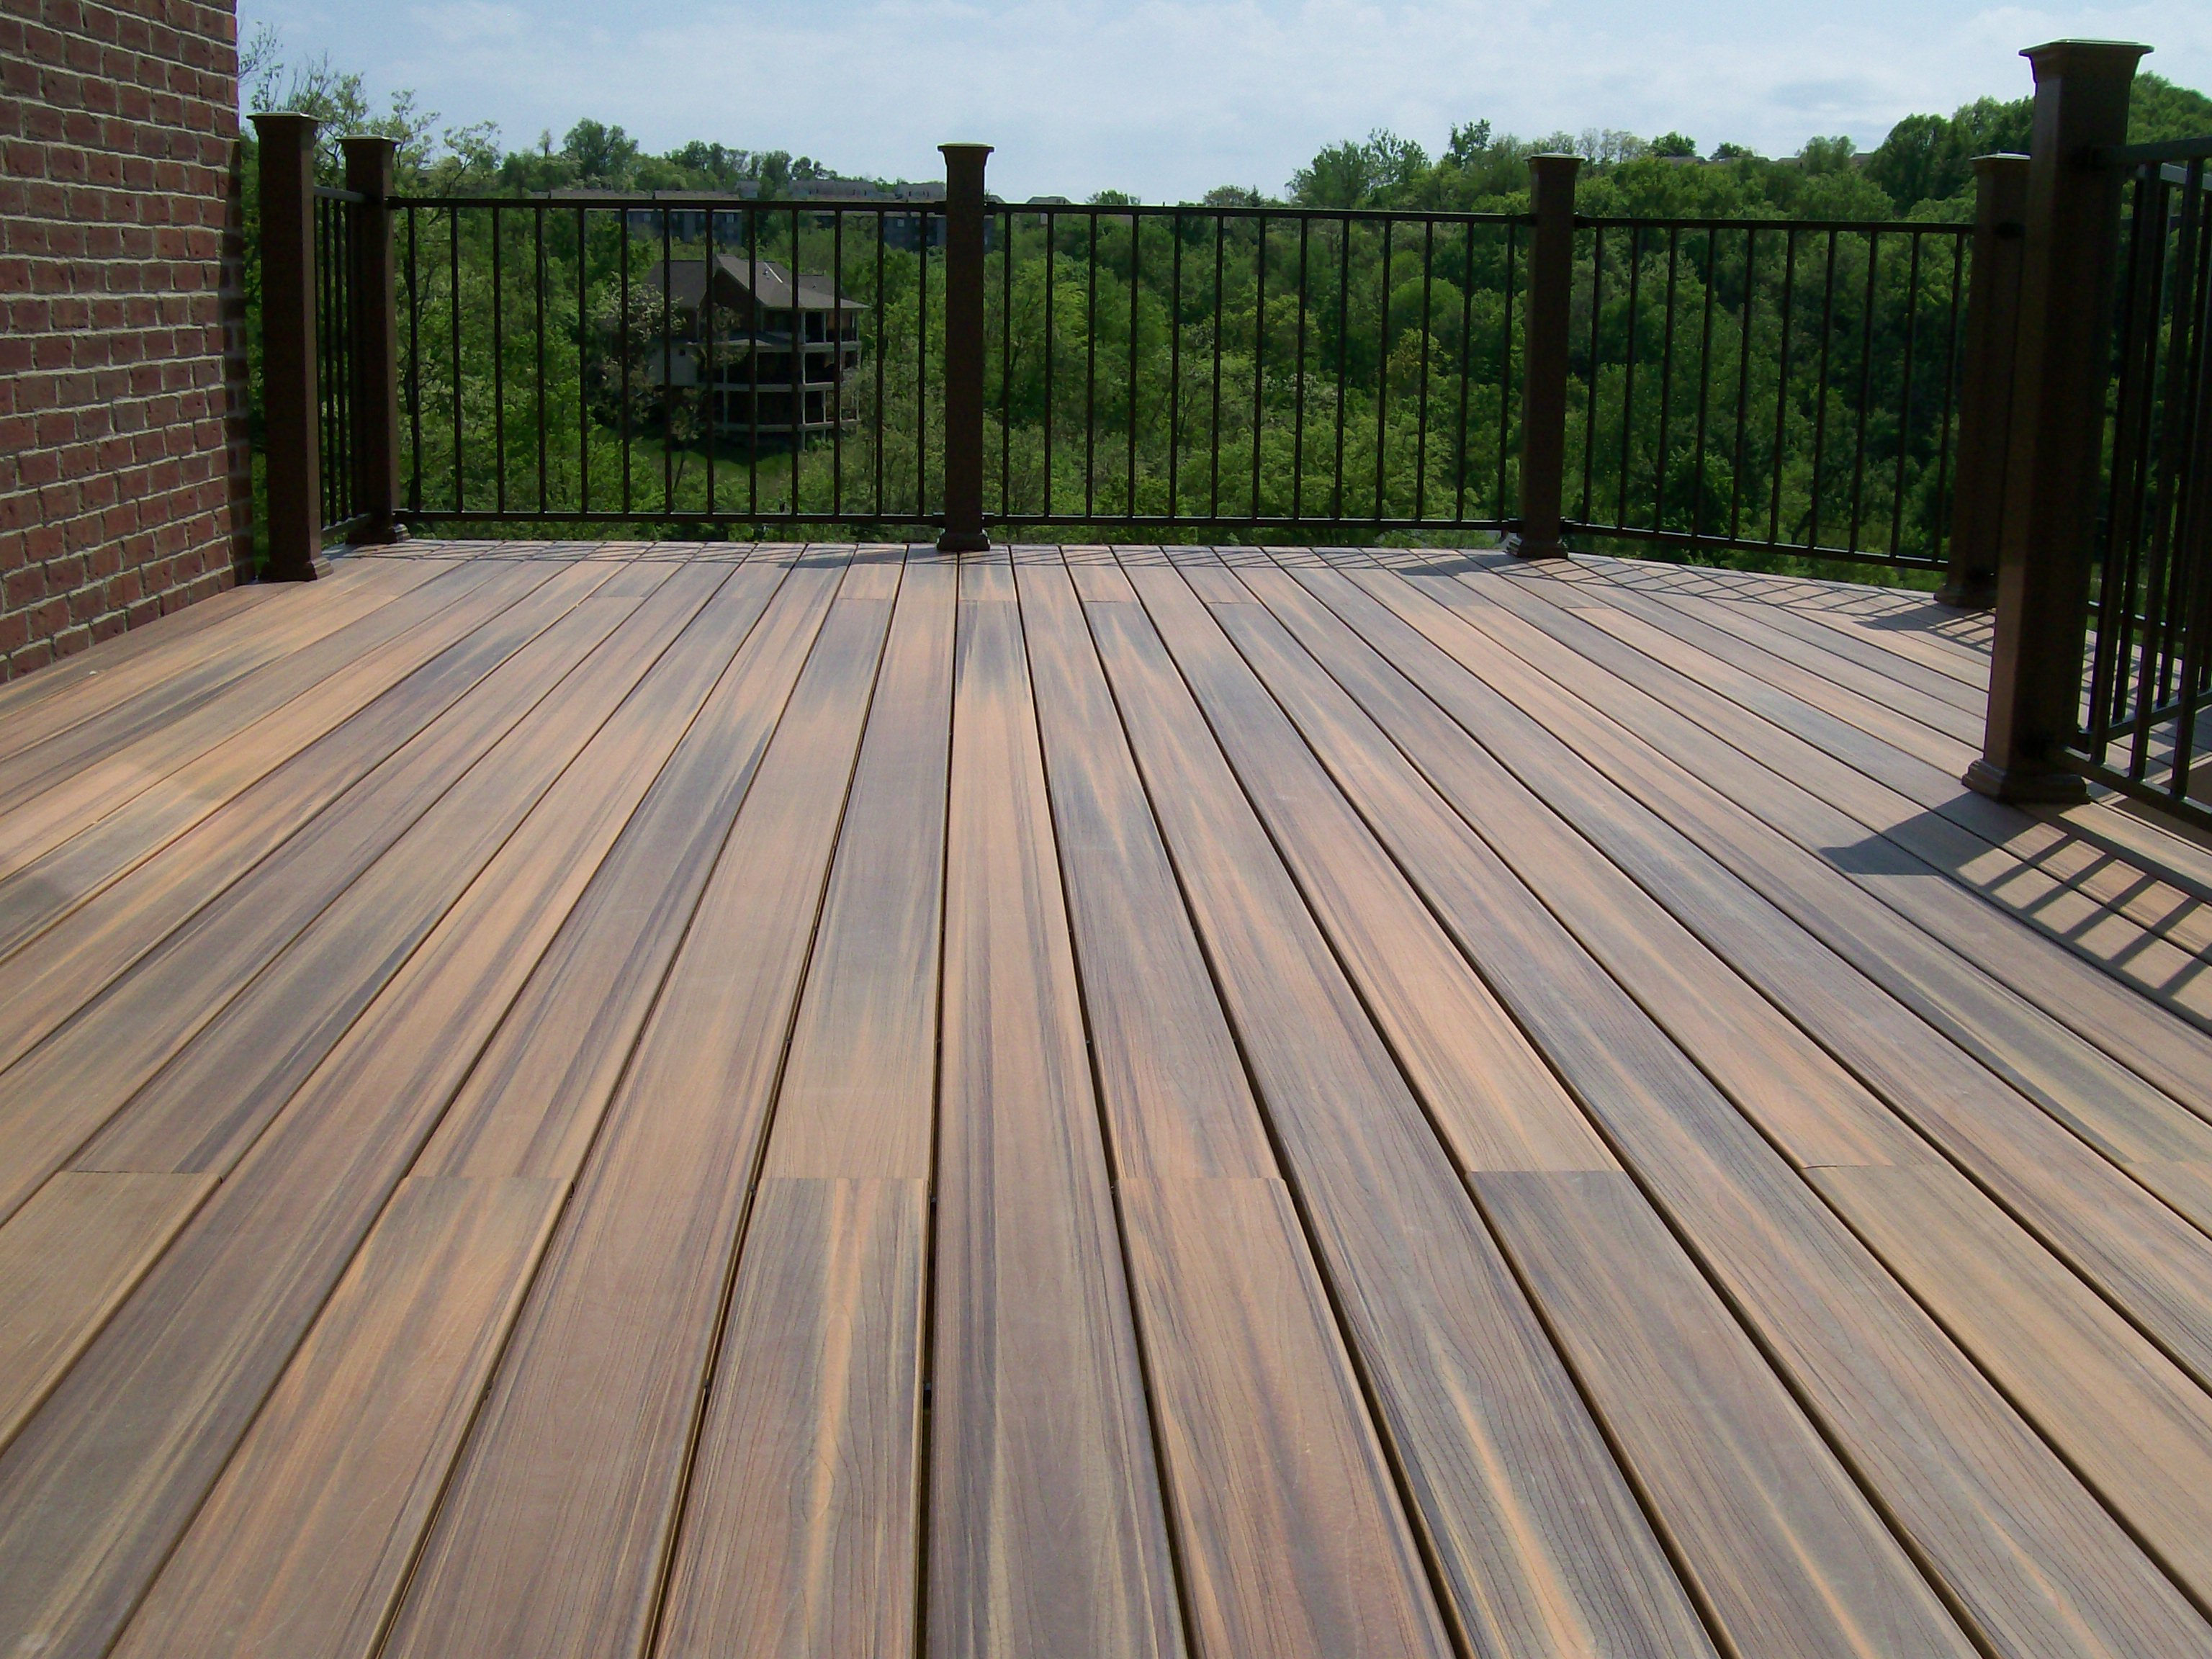 Decking Regularly Cleaning Maintenance Free Decking For Long in sizing 3072 X 2304